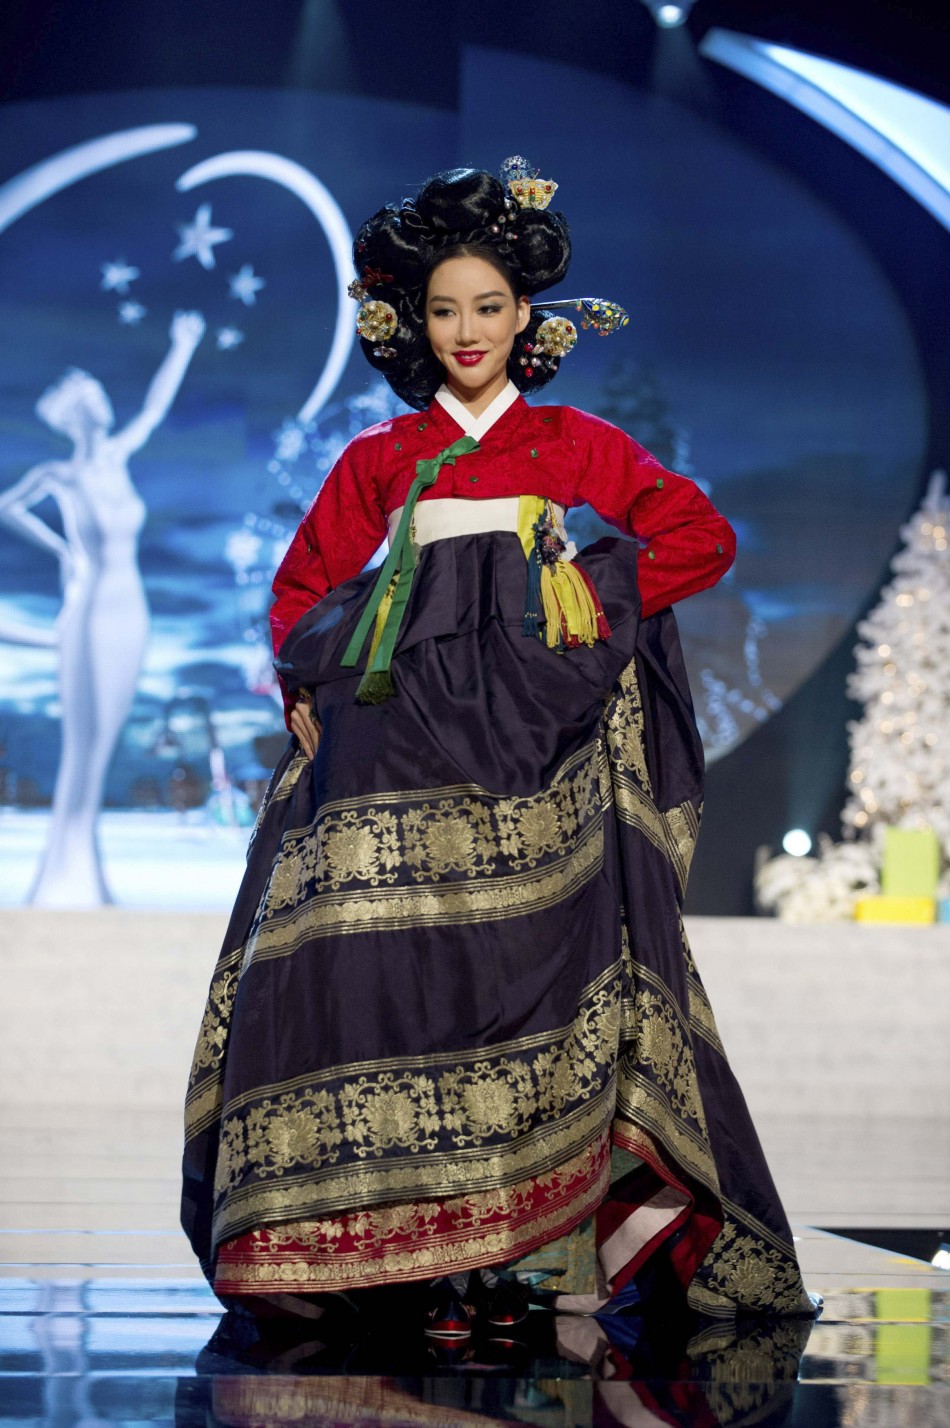 Miss Korea Sung-hye Lee on stage at the 2012 Miss Universe National Costume Show at PH Live in Las Vegas